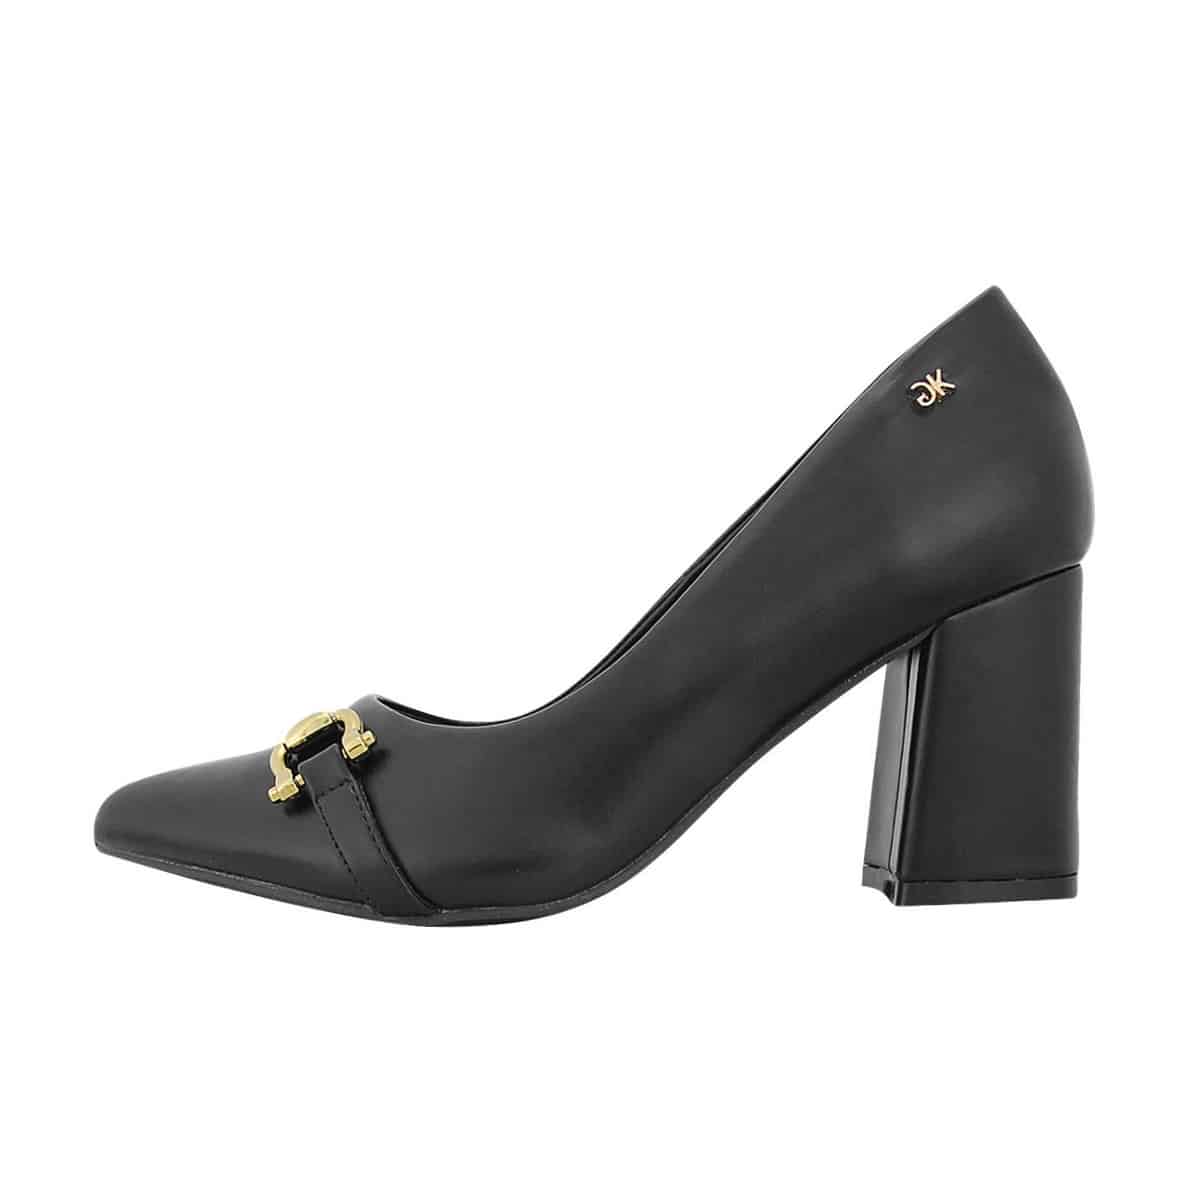 POINTY PUMPS WITH BOLD HEEL AND GOLDEN CLASP L917-2L GIANNA KAZAKOU BLACK